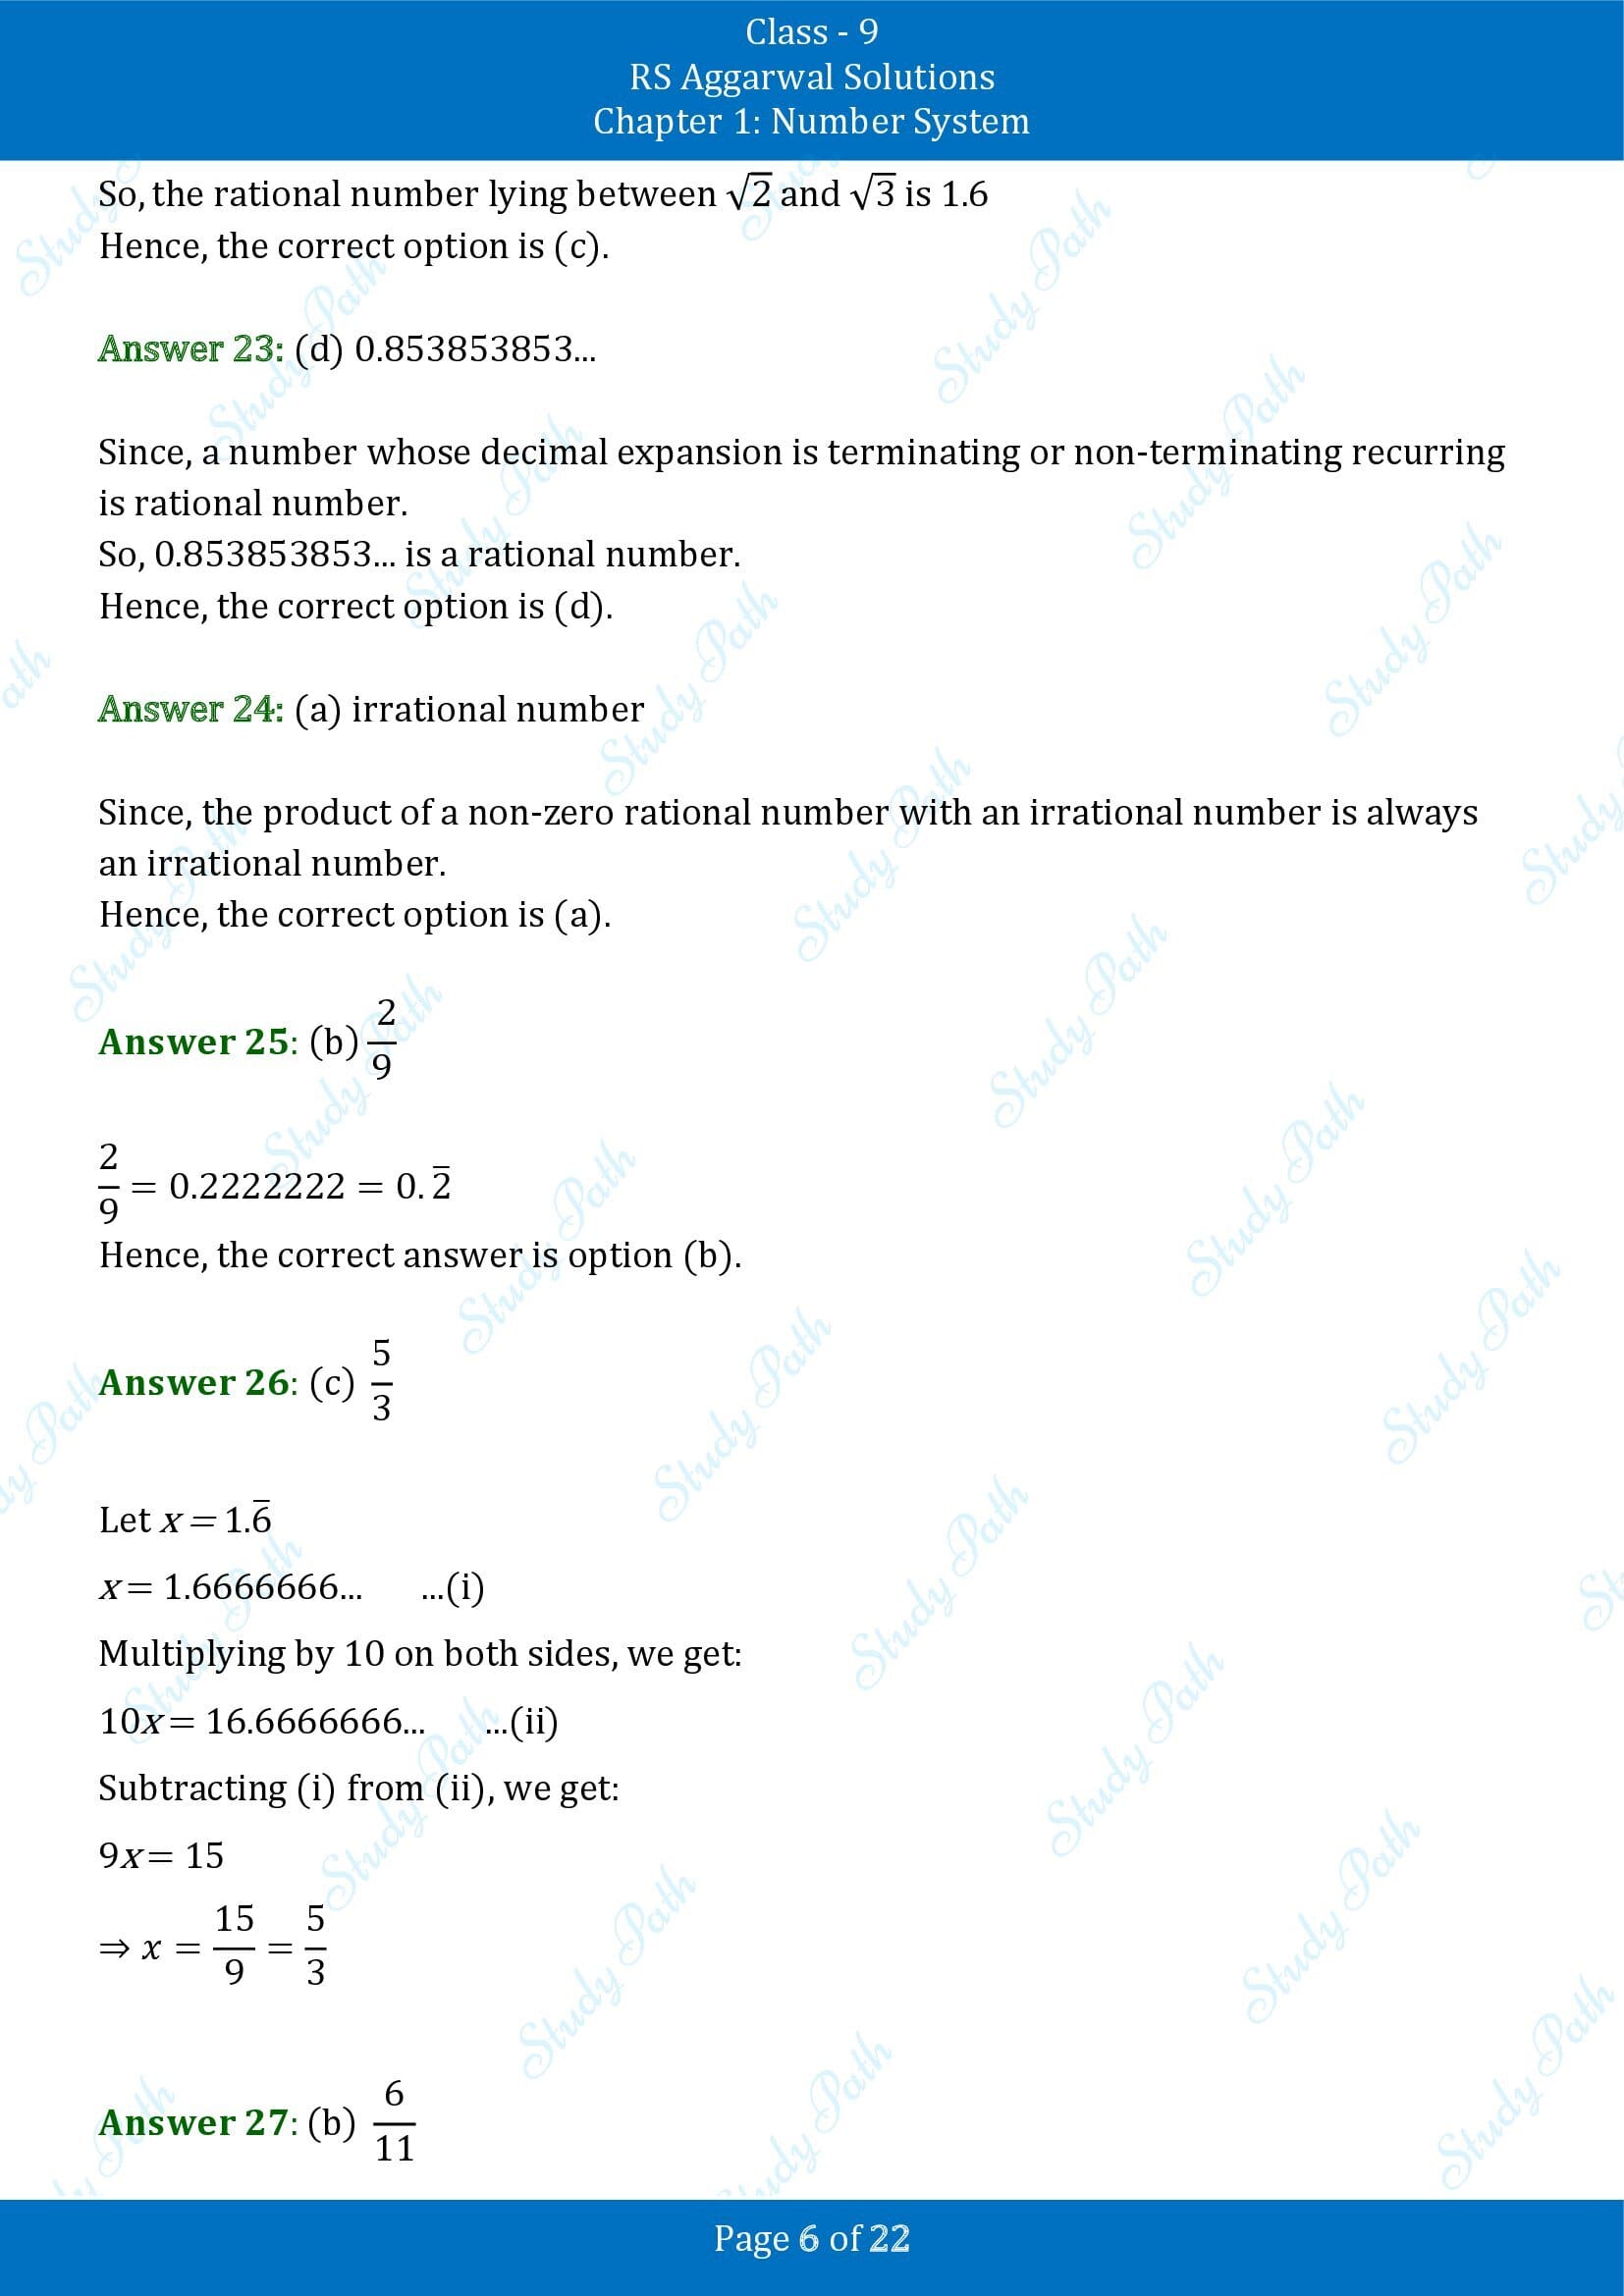 RS Aggarwal Solutions Class 9 Chapter 1 Number System Multiple Choice Questions MCQs 00006